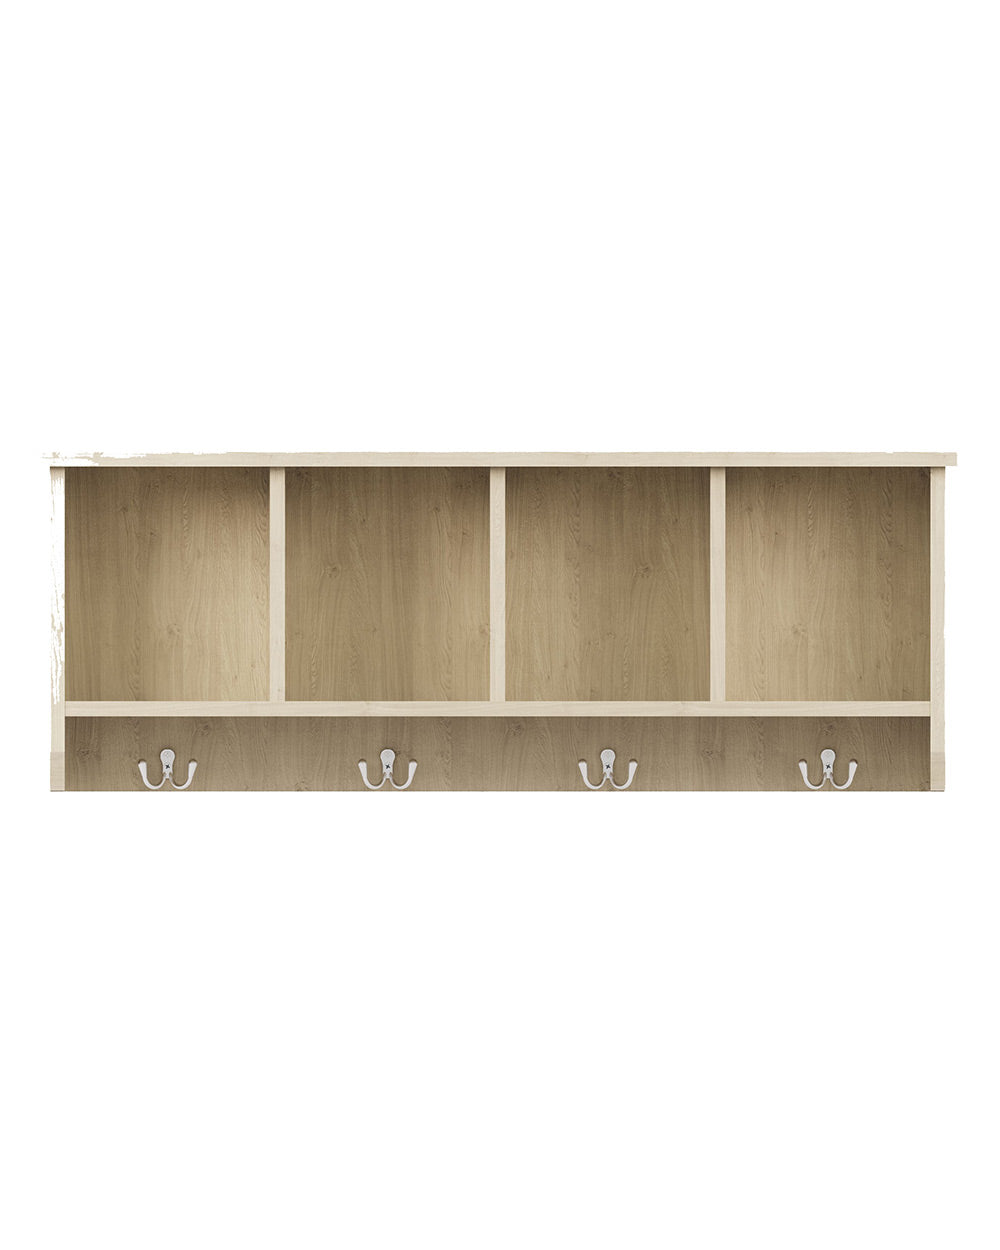 GFW Kempton wall rack oak effect hallway storage unit featured on a white cut out background front facing full view